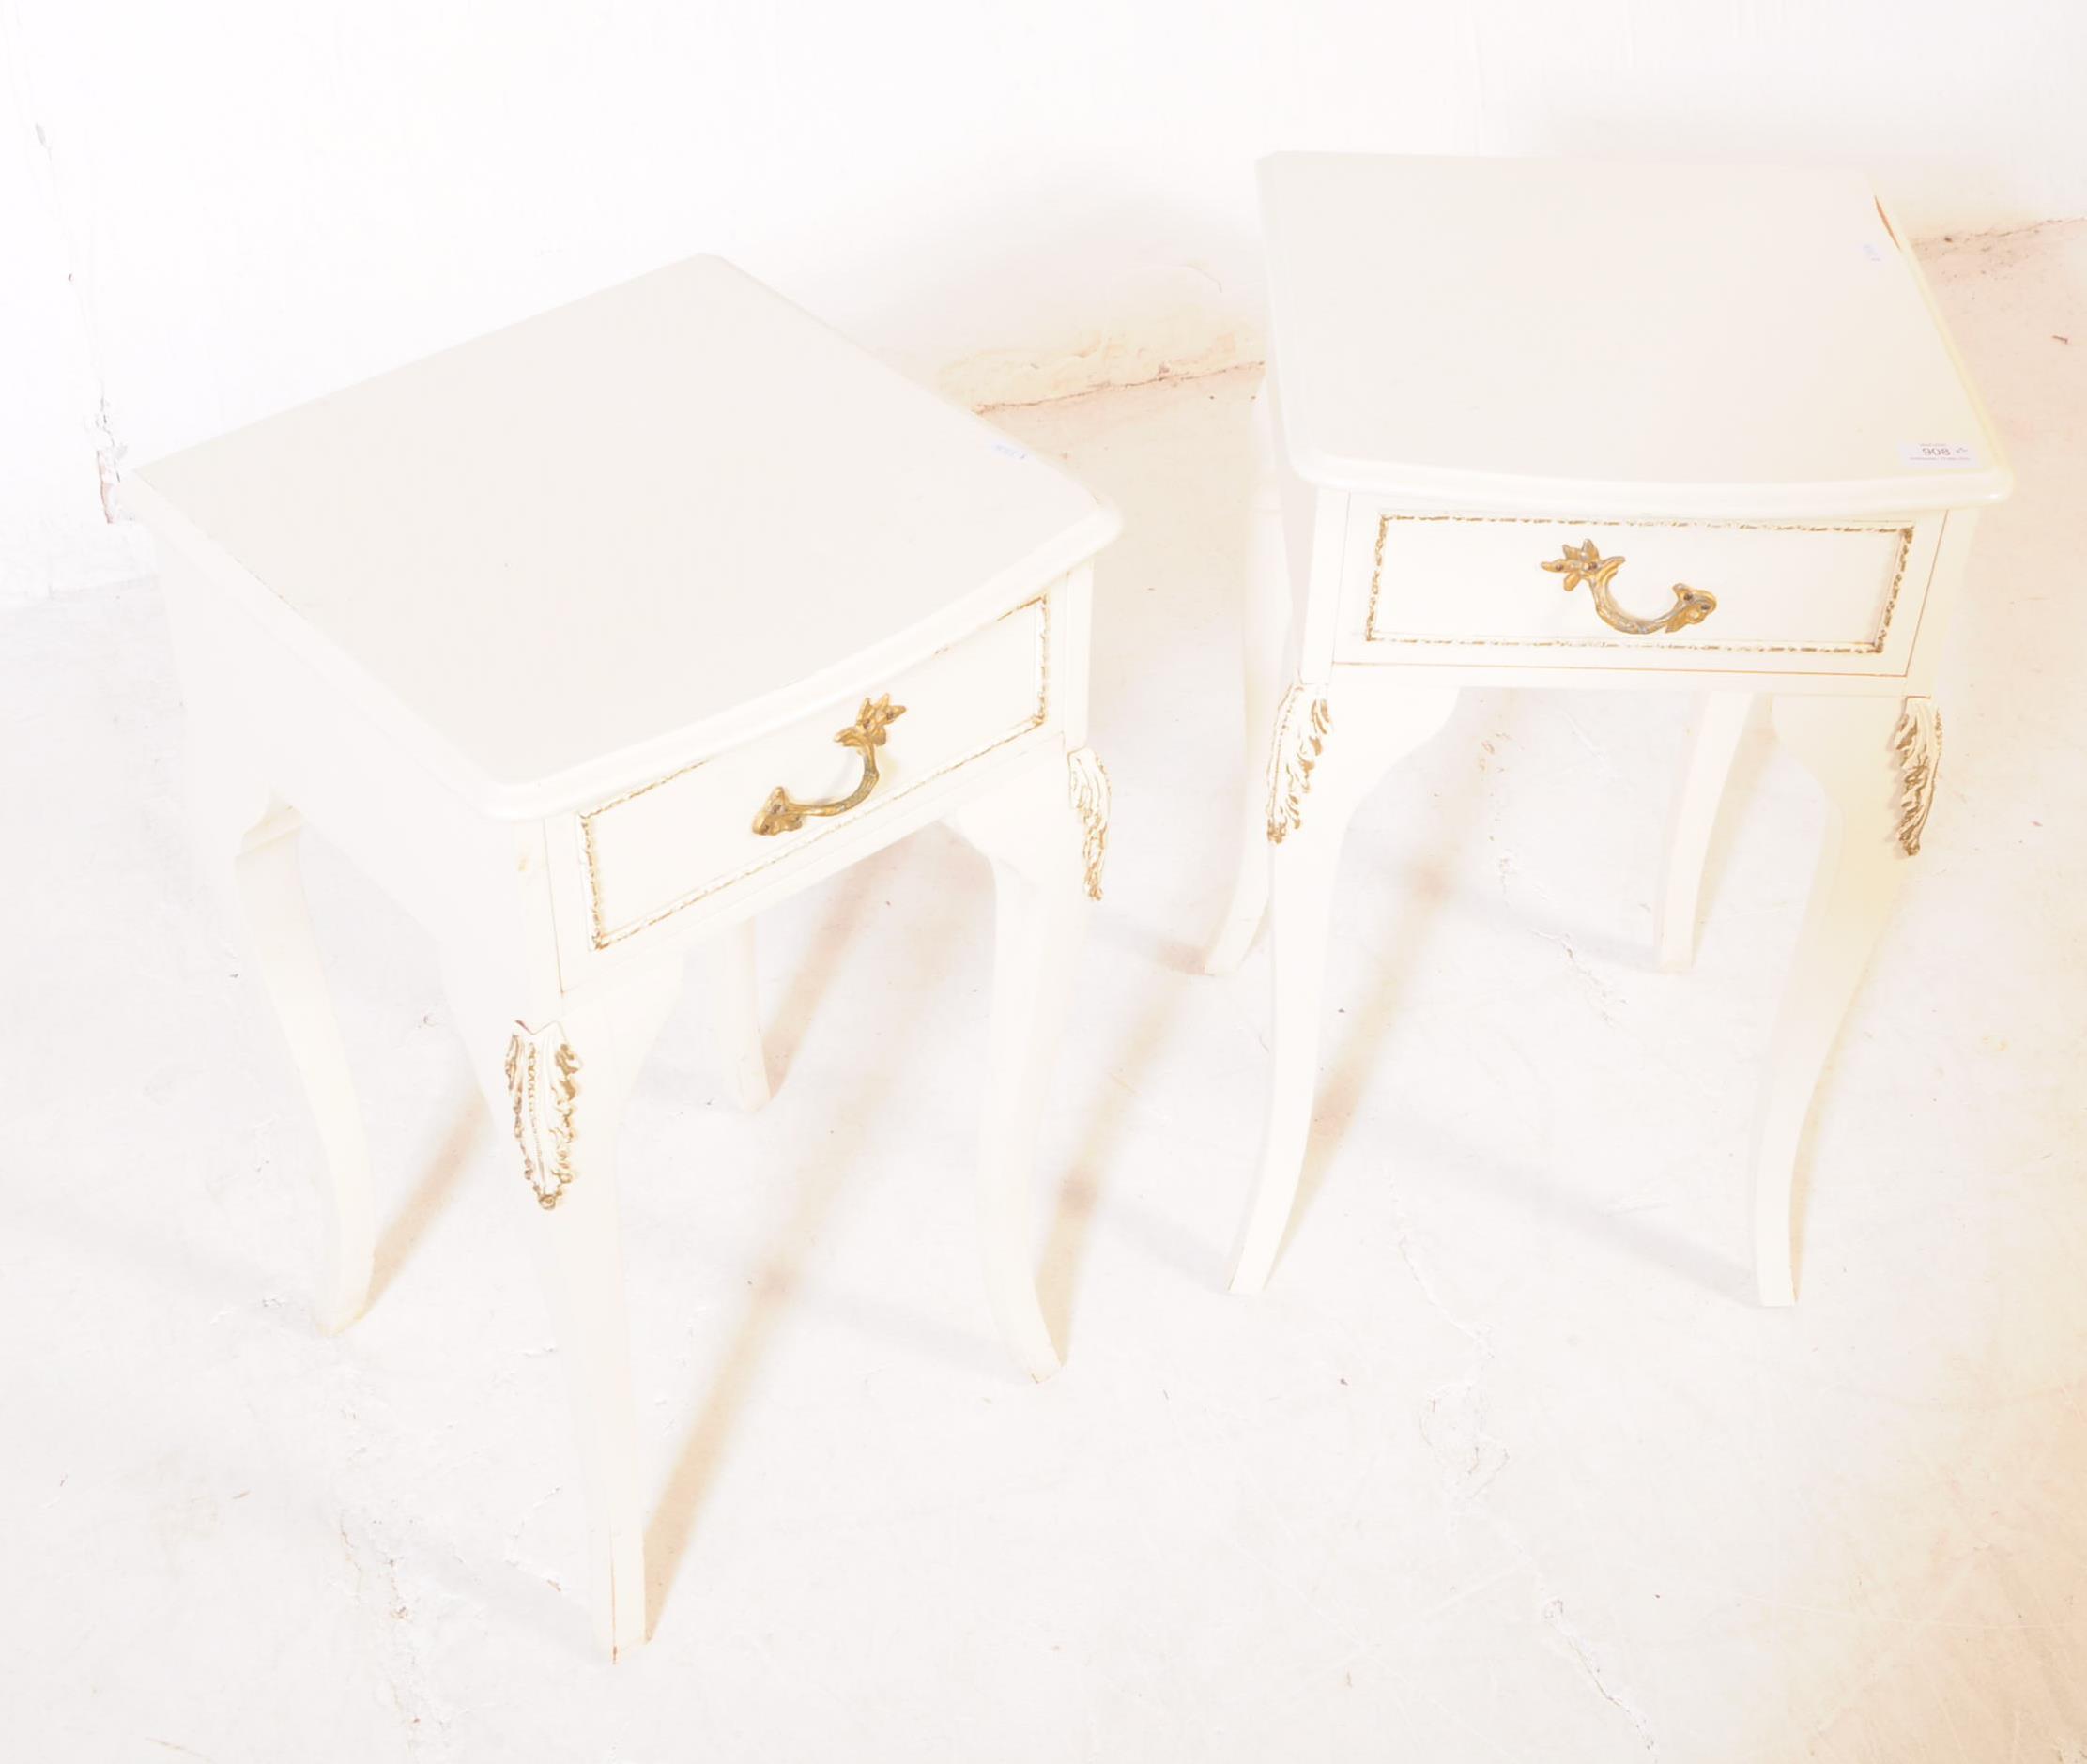 PAIR OF LOUIS XVI REVIVAL BEDSIDE TABLES - Image 2 of 6